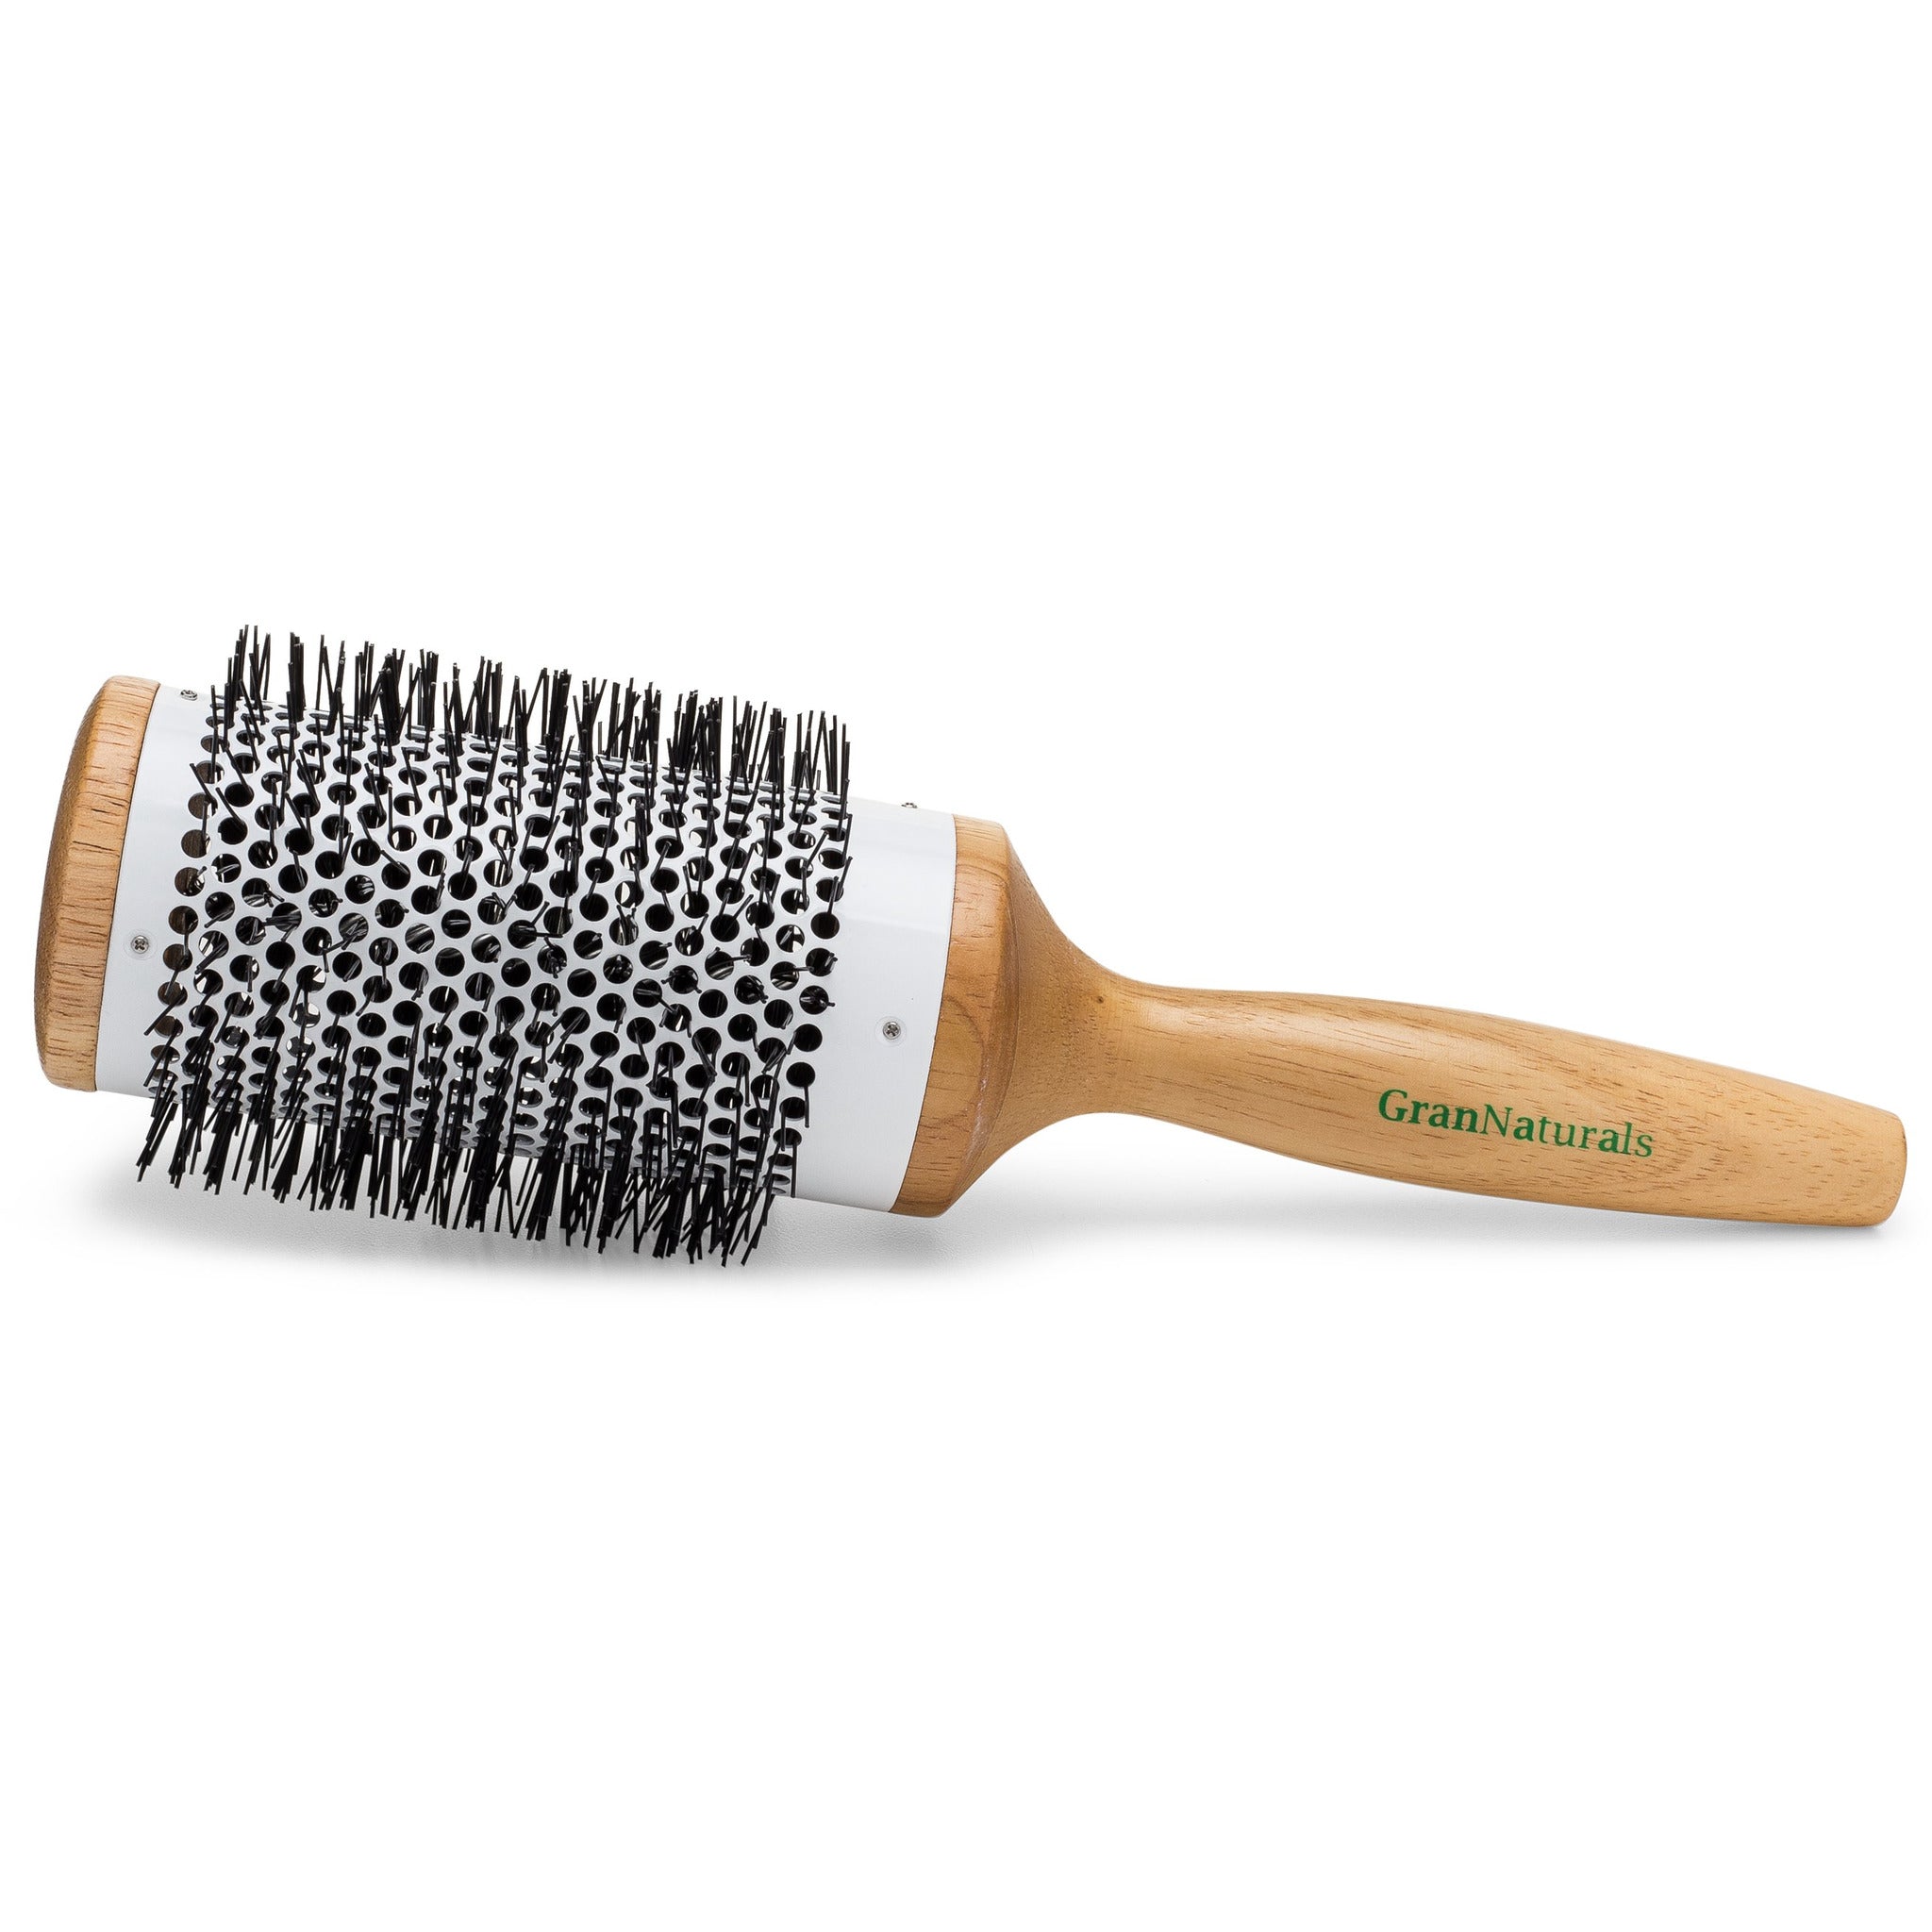 Round Blow Dryer Brush - Ceramic Barrel - Large 2.3 Inch Round Brush for Blow Drying - Thermal & Ionic Roll Styling Hairbrush to Blow Dry - Natural Wooden with Nylon Bristles - Hair Brush For Women